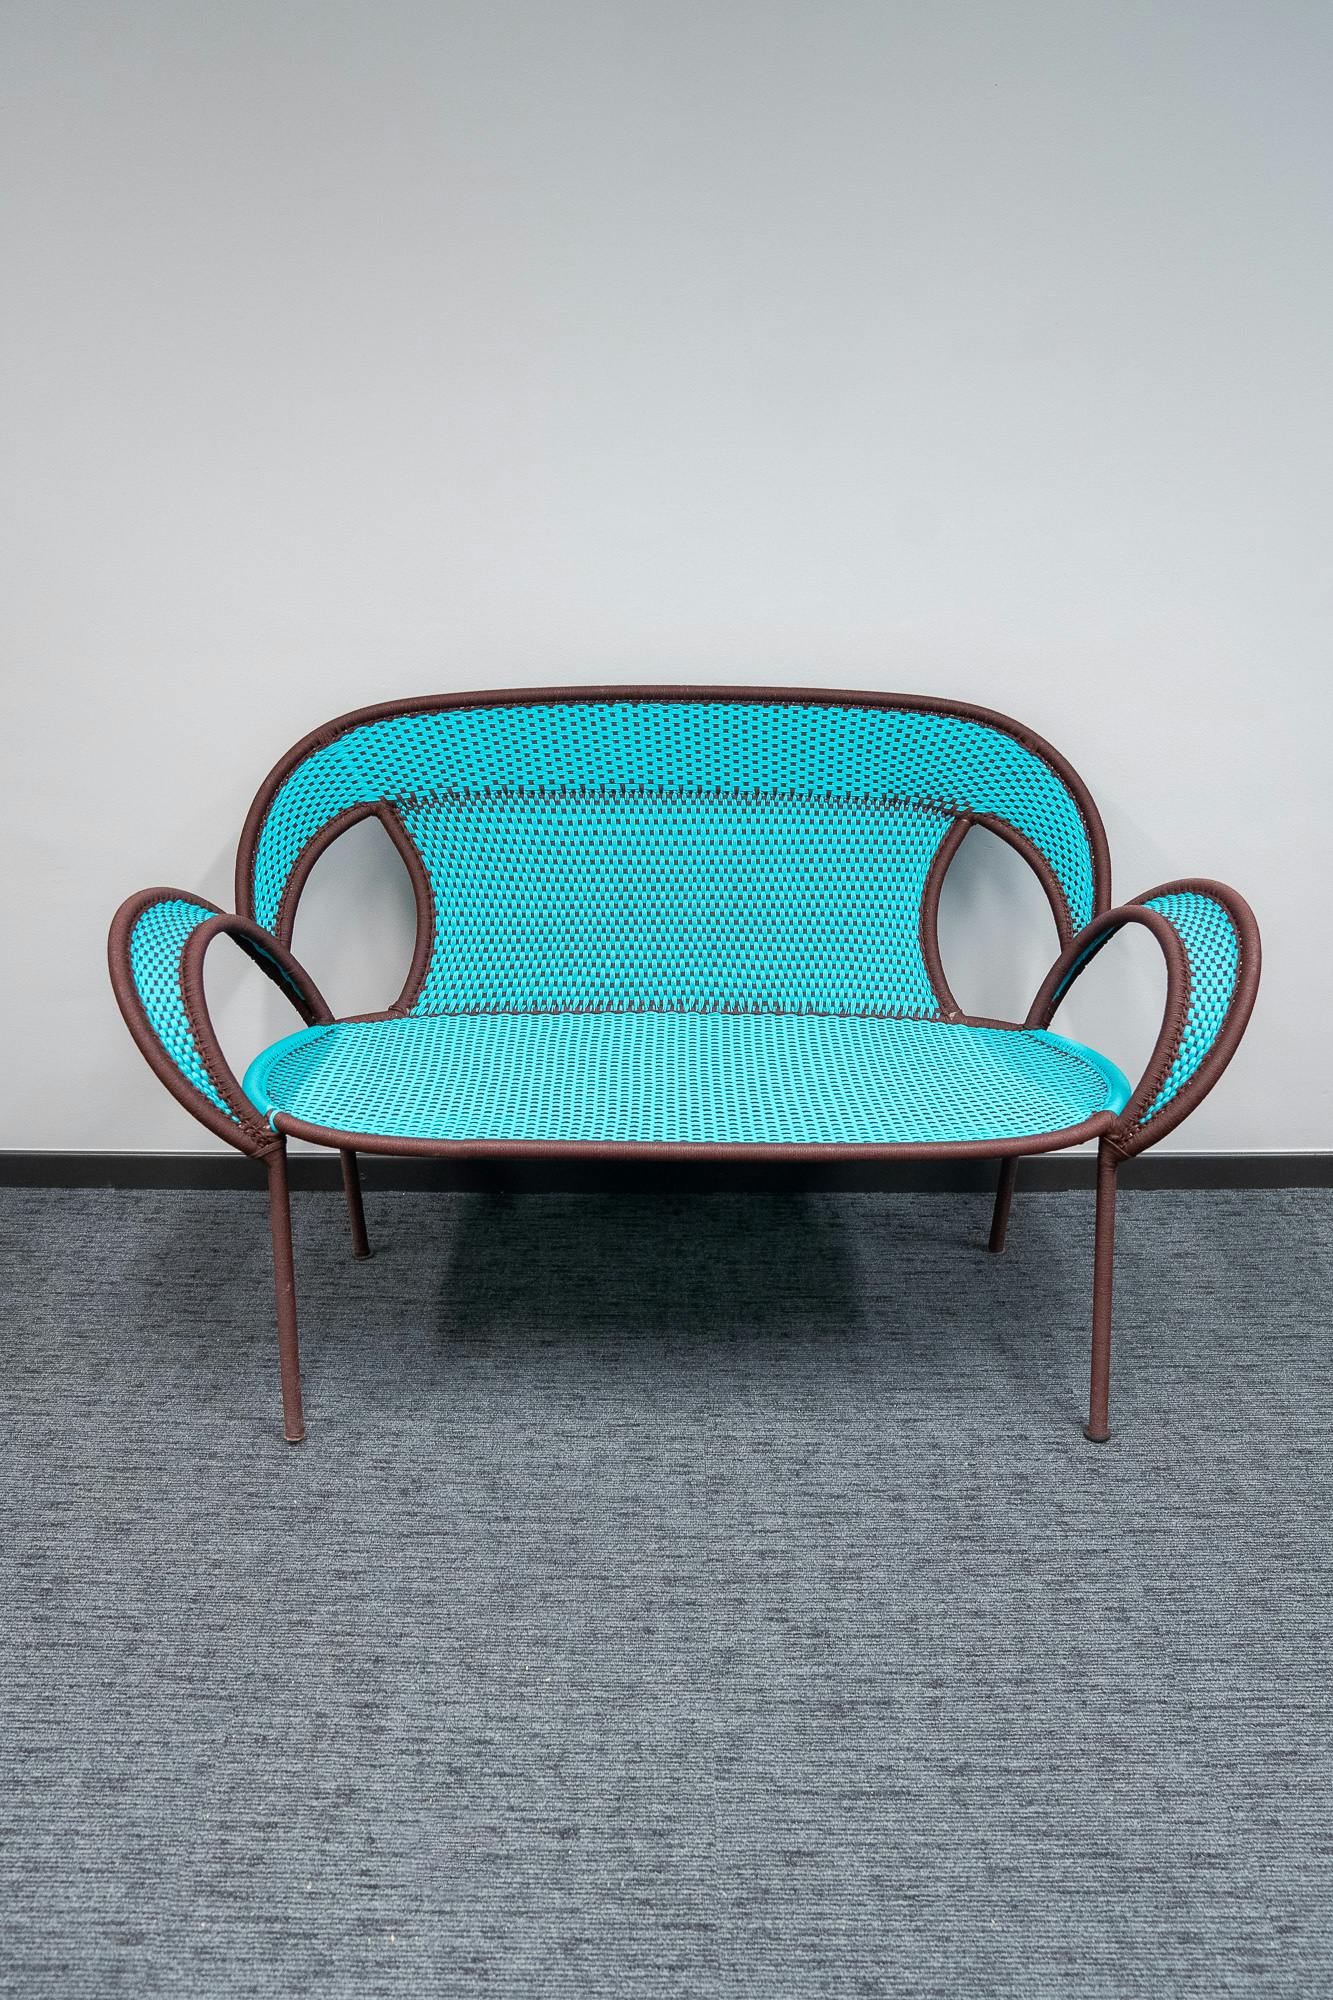 Turquoise and brown wicker sofa - Relieve Furniture